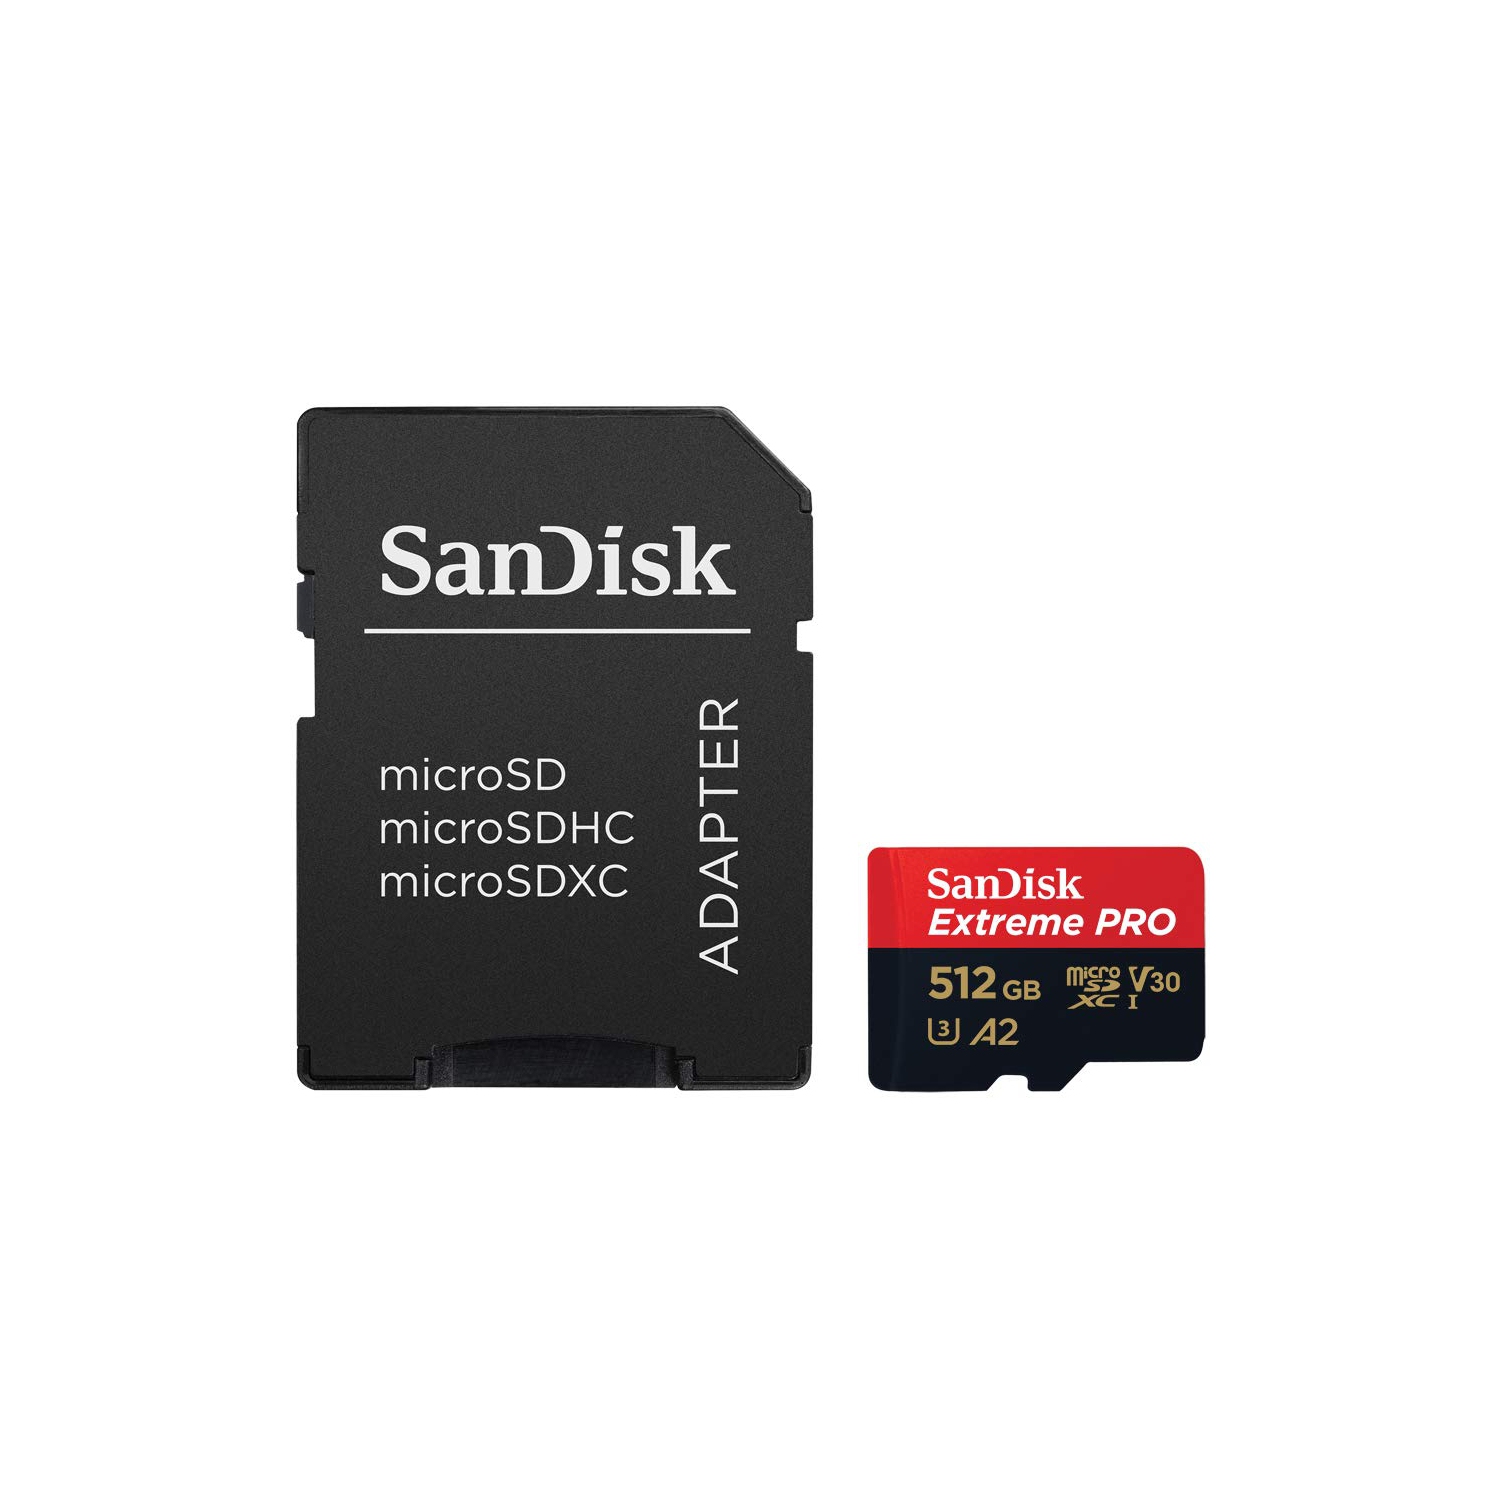 SanDisk 512GB Extreme Pro MicroSD Memory Card (2 Pack) Works With GoPro  Hero 10 Black Action Camera U3 V30 4K A2 Class 10 (SDSQXCZ-512G-GN6MA)  Bundle